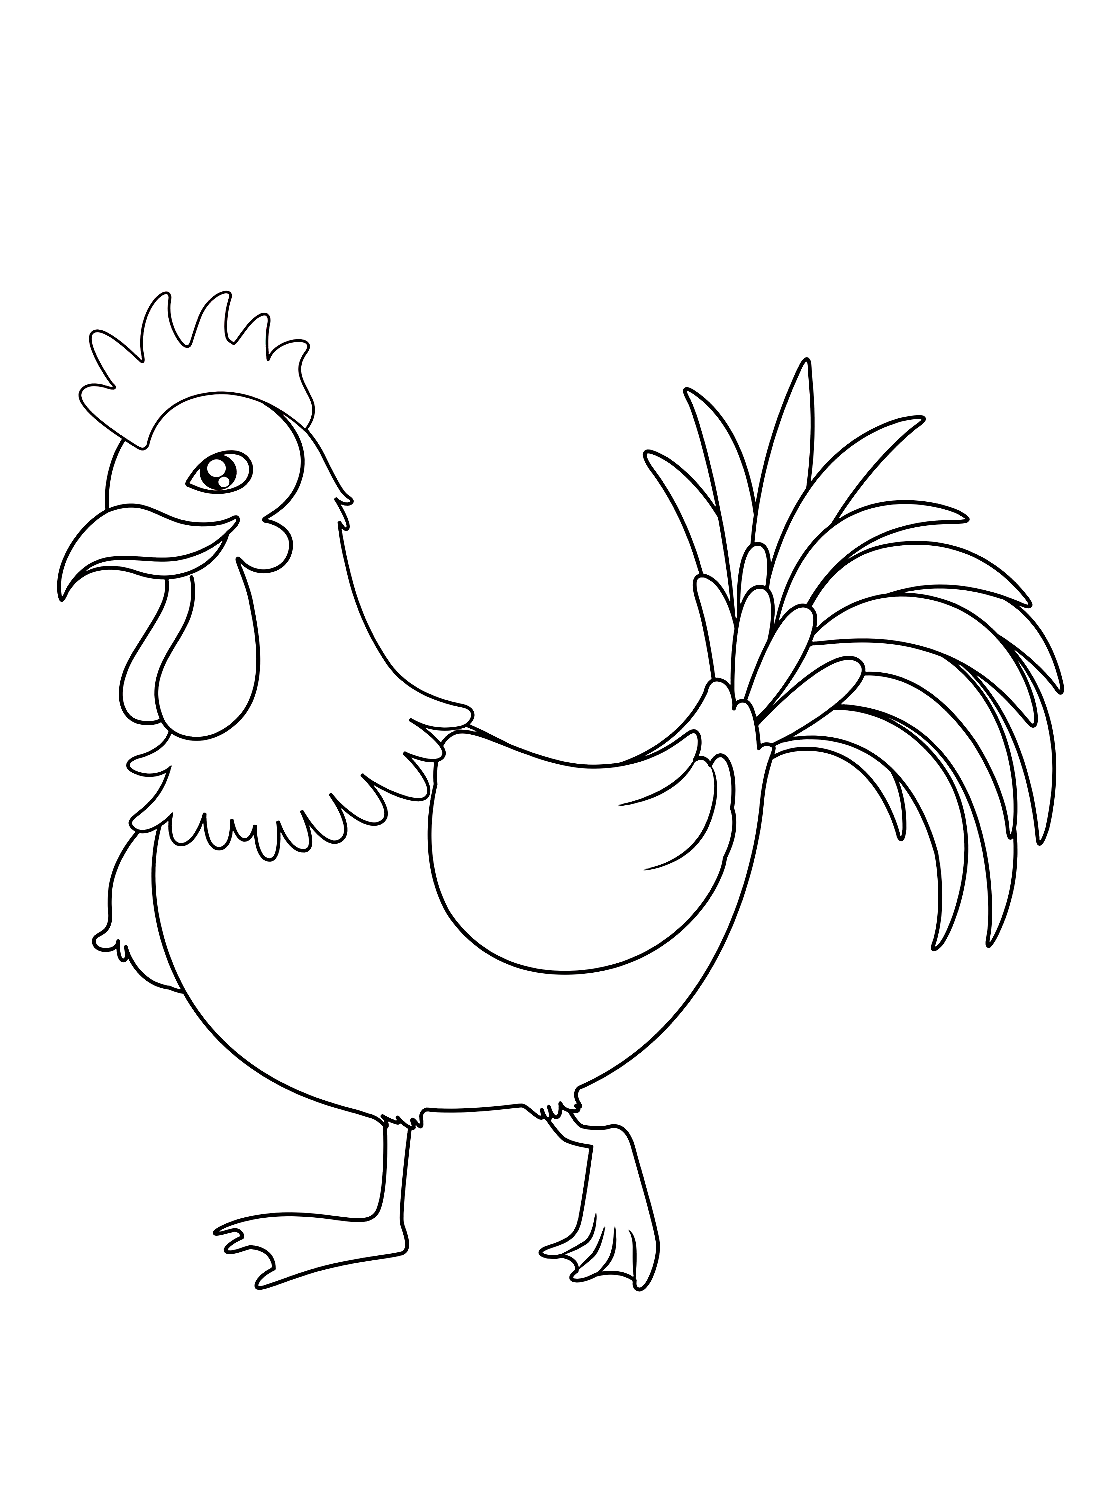 The cute rooster Coloring Pages